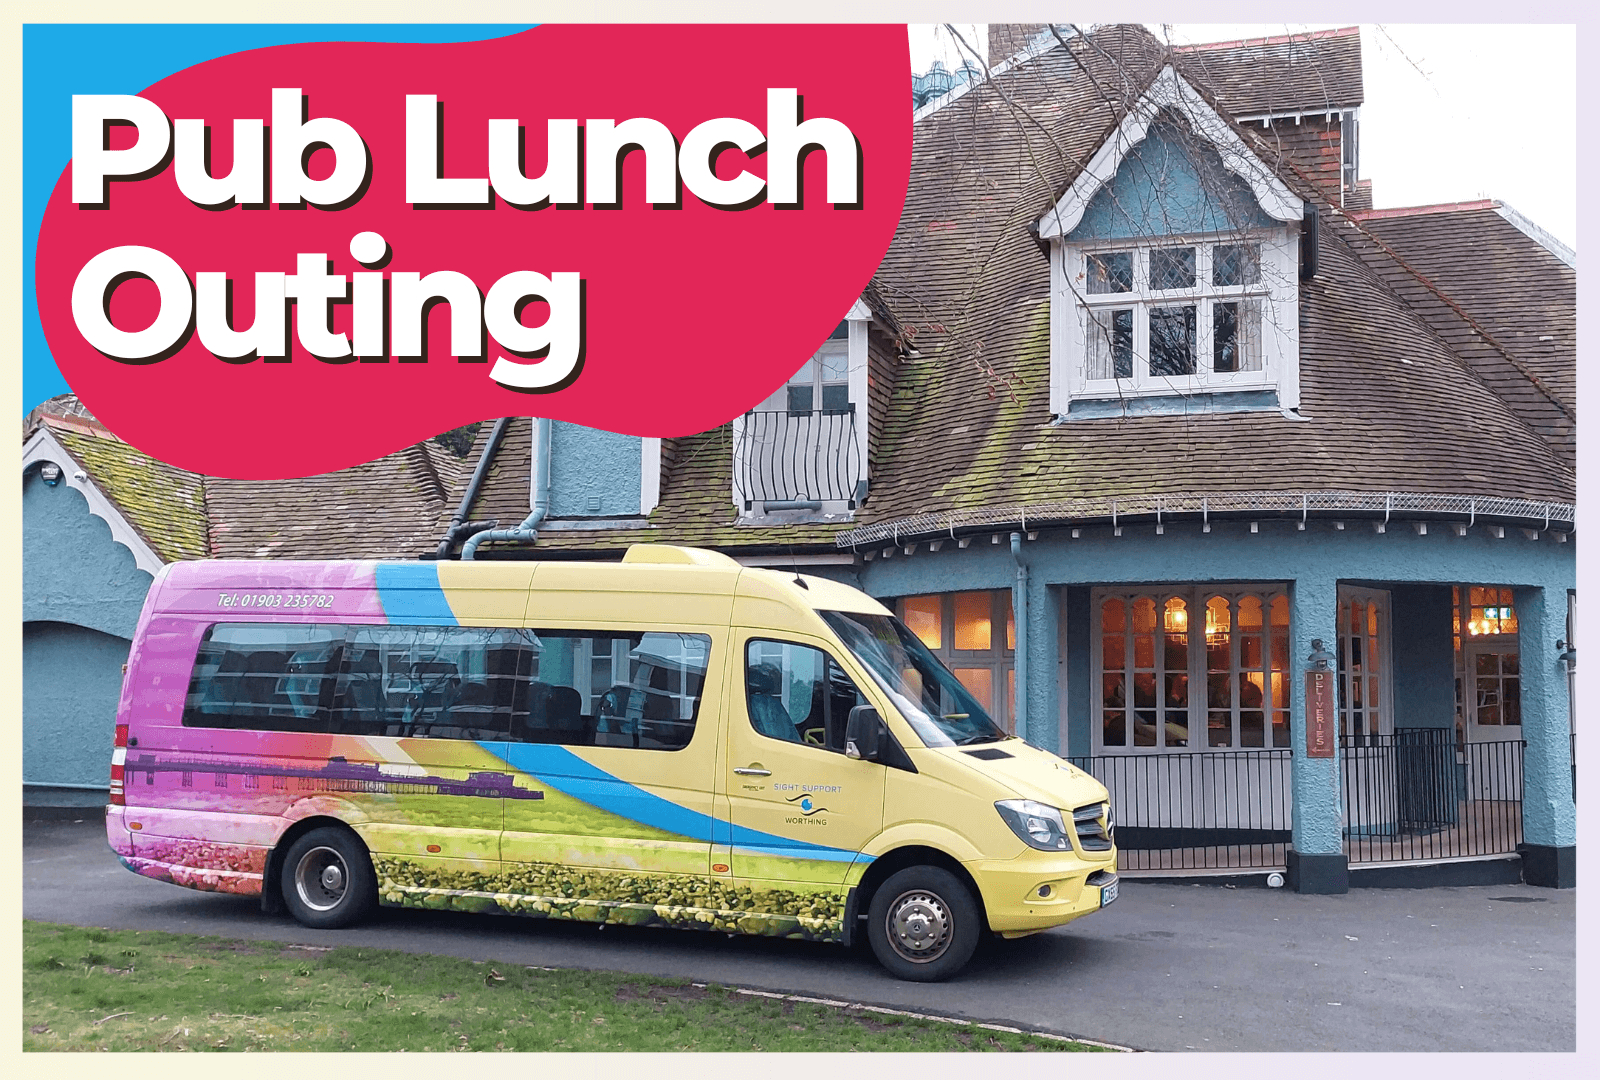 An image of SSW's minibus in front of a pub with the words 'Pub Lunch Outing' overlaid.